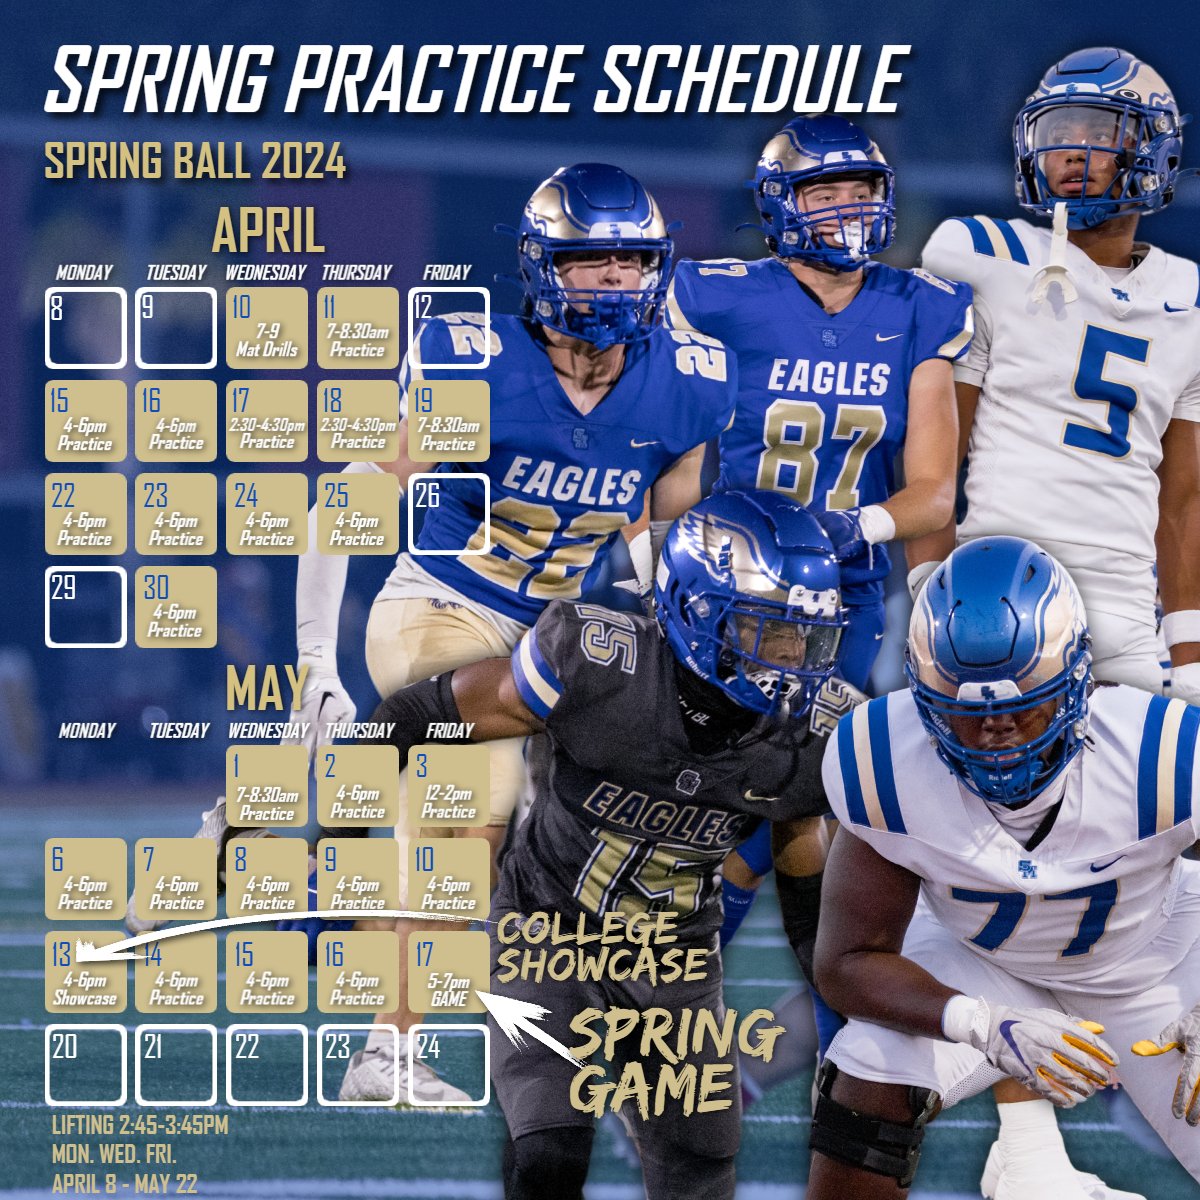 2024 Spring Ball Schedule! Time to get to work and ready for Fall

#GoEagles🦅 #WeAreSM